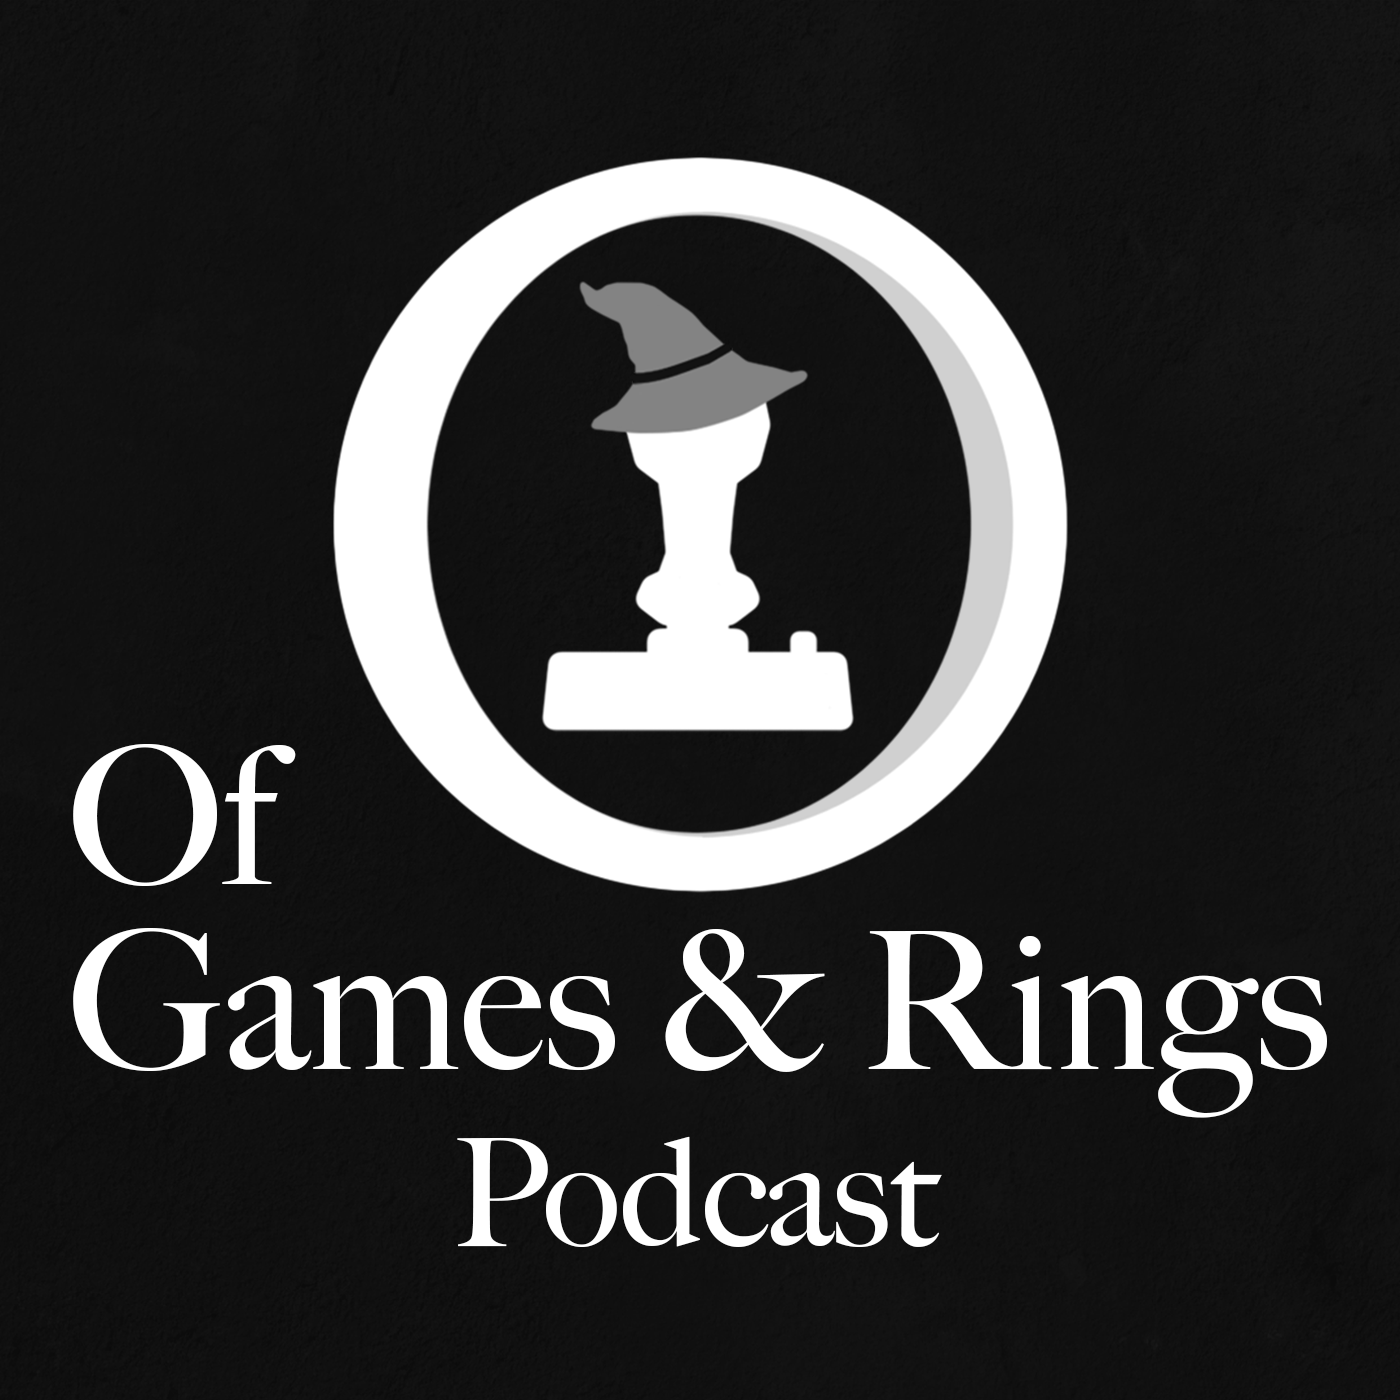 Of Games & Rings Podcast